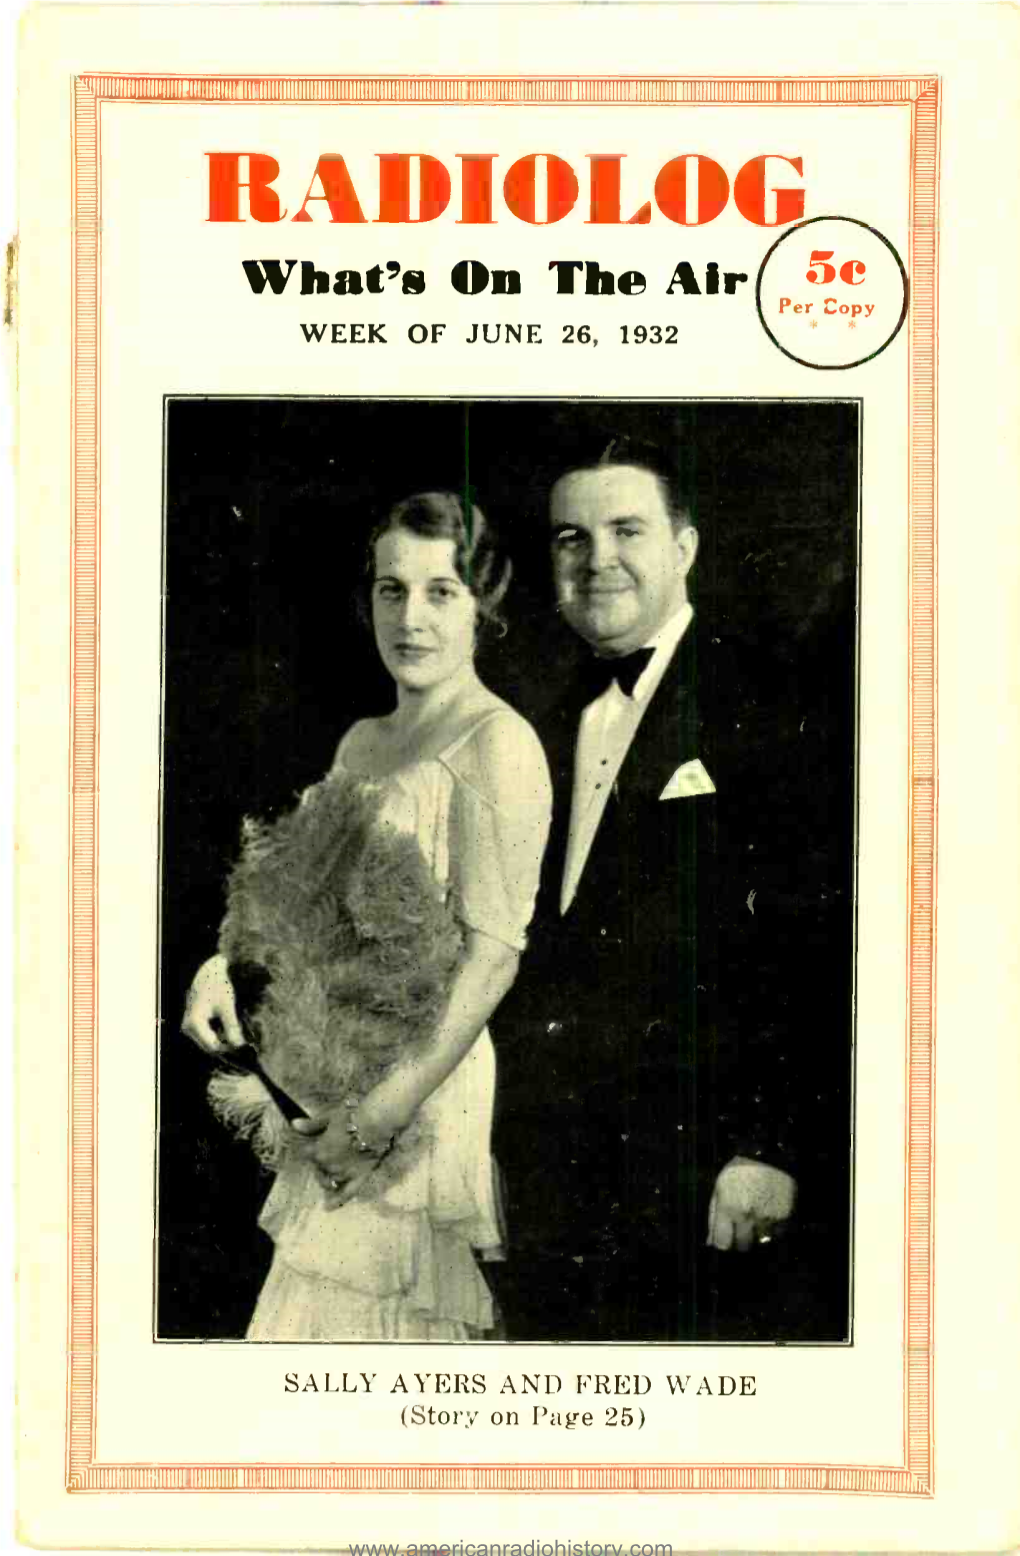 RADIOLOG What's on the Air 5E Per 'Copy WEEK of JUNE 26, 1932